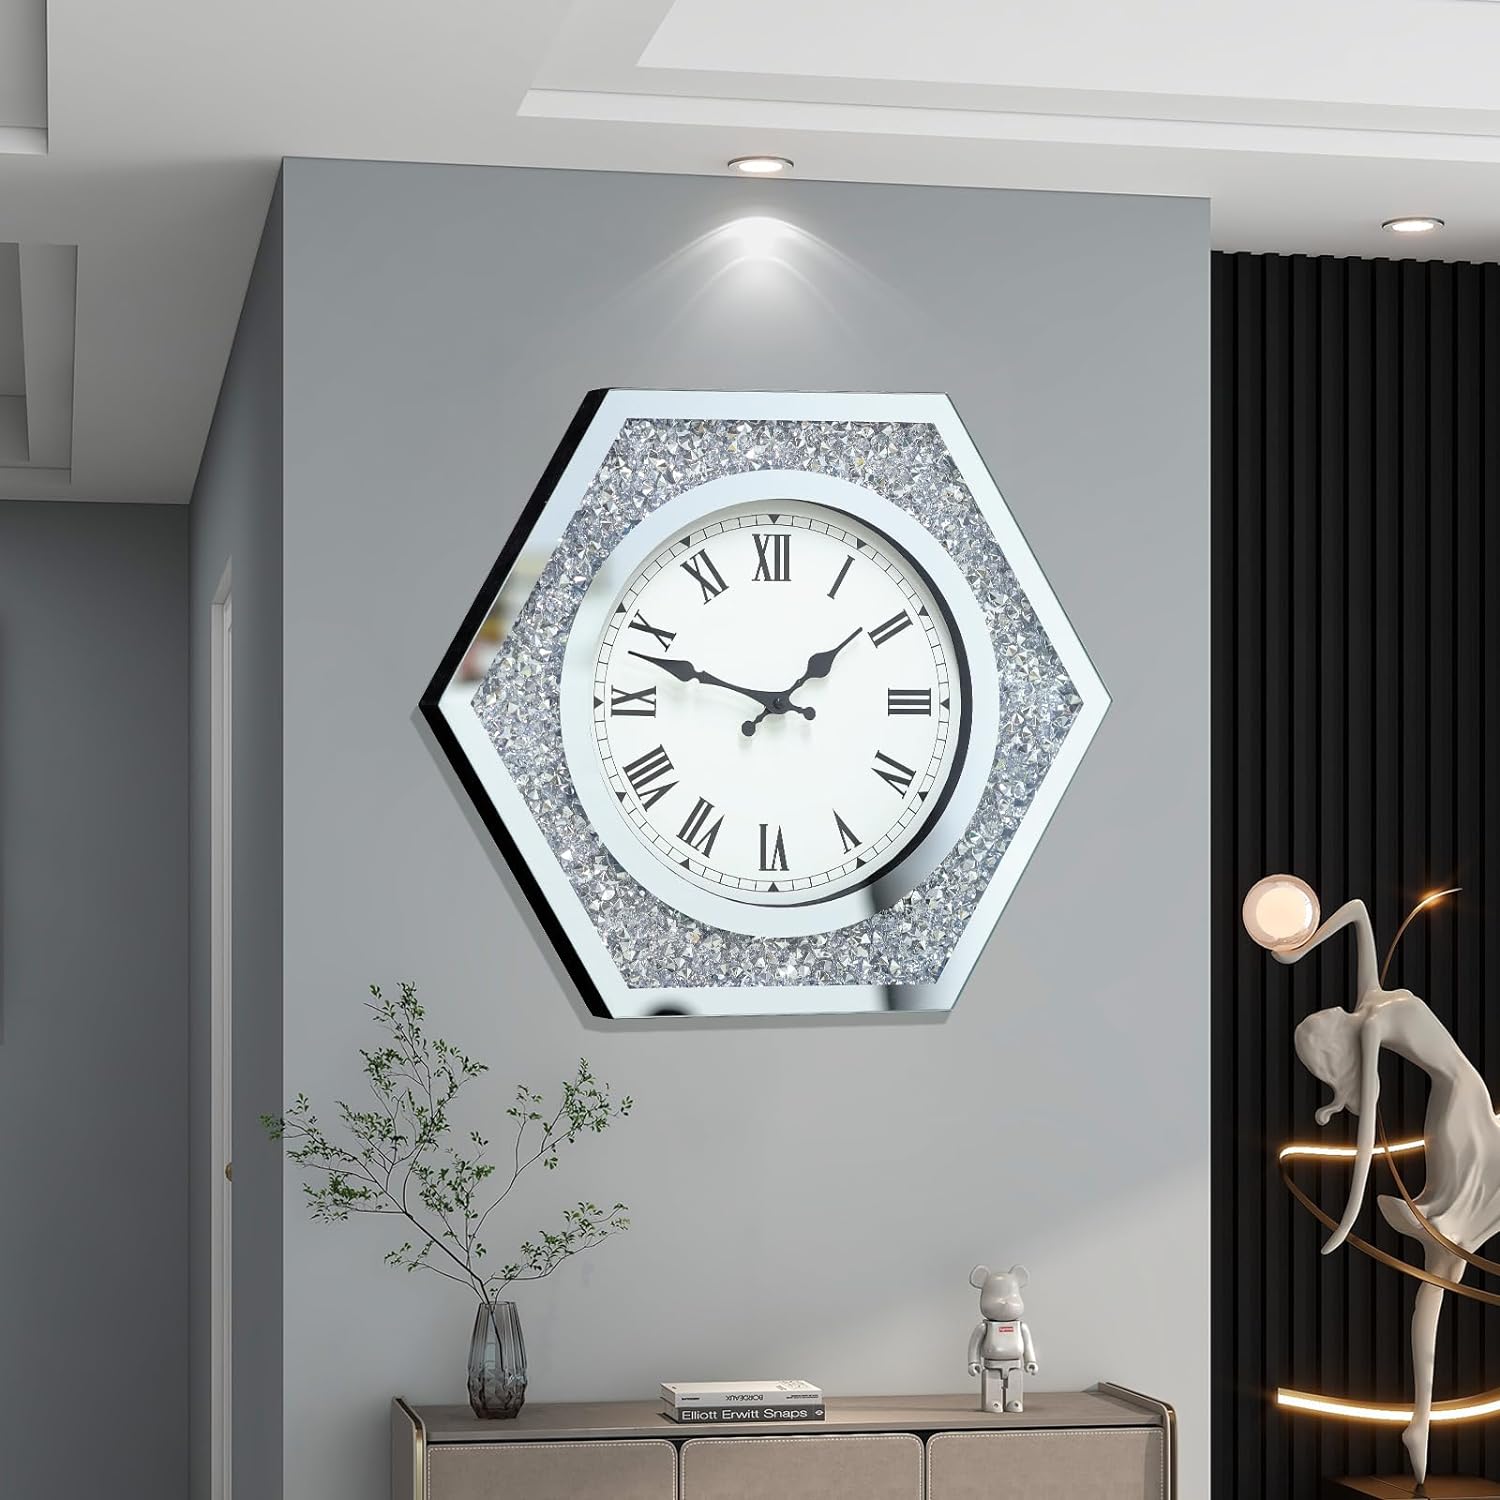 JTWALCLOCK Large Wall Clock for Living Room Decor Crystal Crush Diamond Mirrored Sparkle Twinkle Bling Modern Wall Clock Big Silver Mirror Home Decorative 20 inch Silent Wall Clock for Indoor Decor